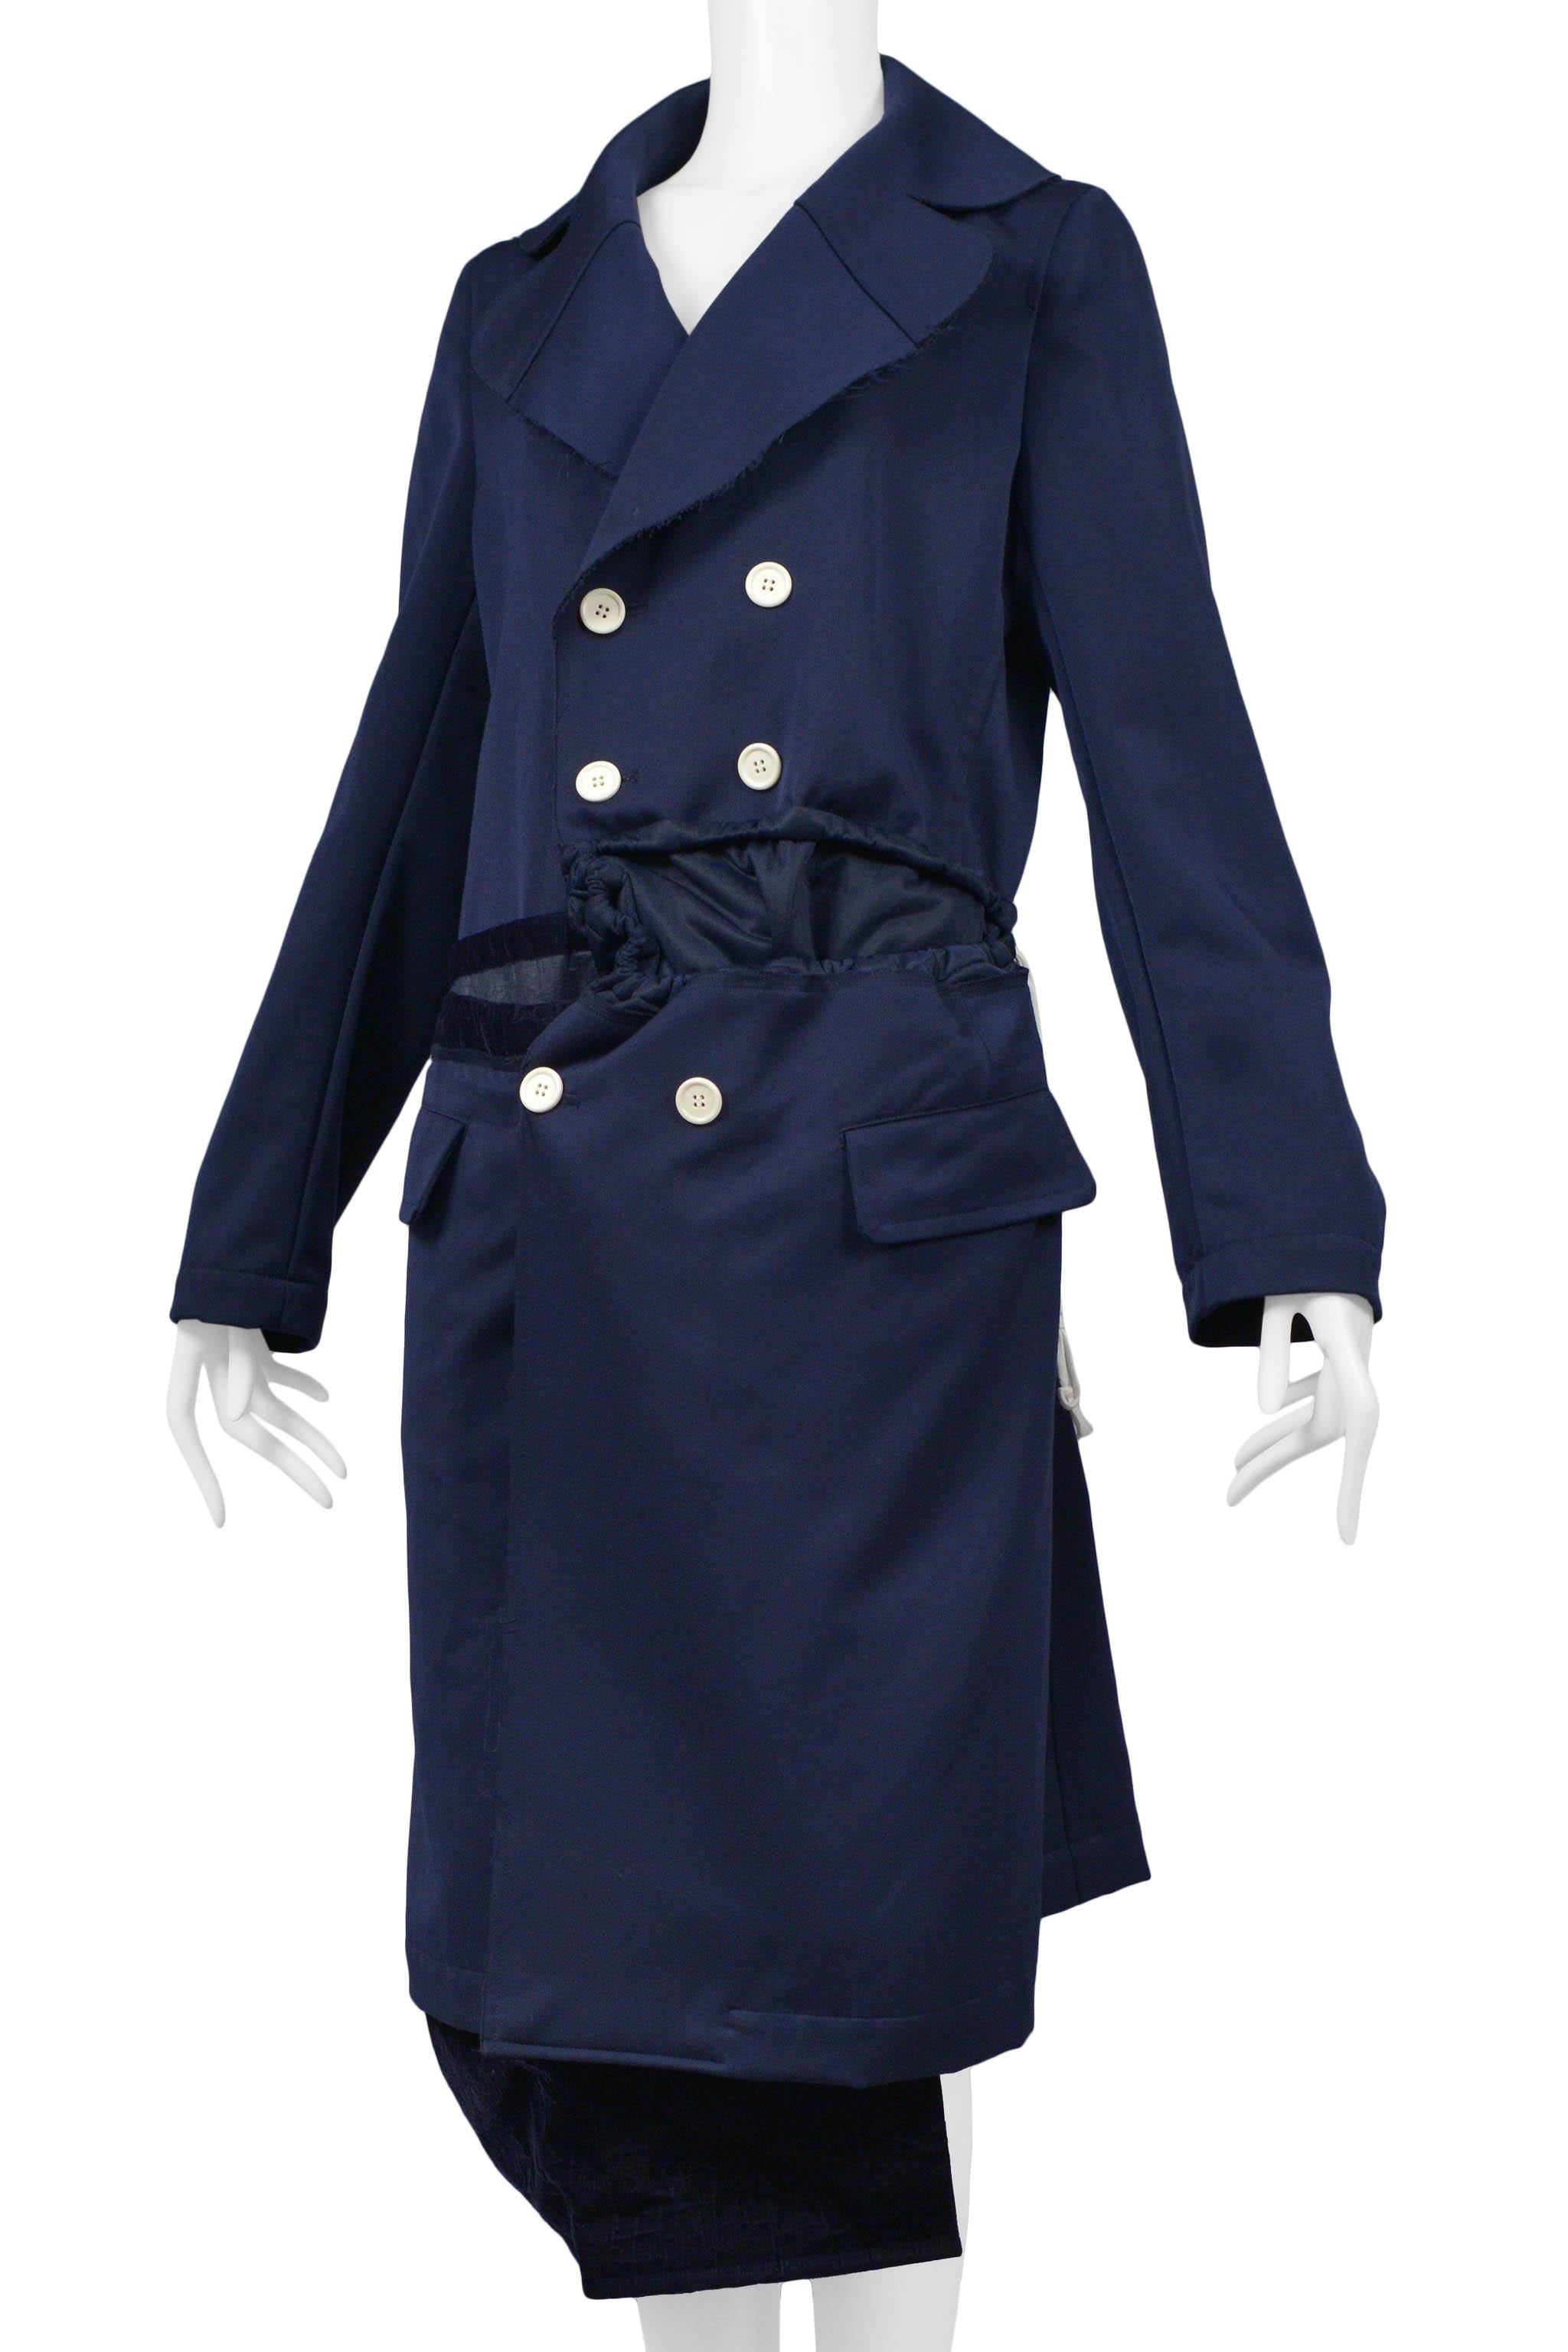 Comme Des Garcons Blue Deconstructed Coat 2008 In Excellent Condition For Sale In Los Angeles, CA